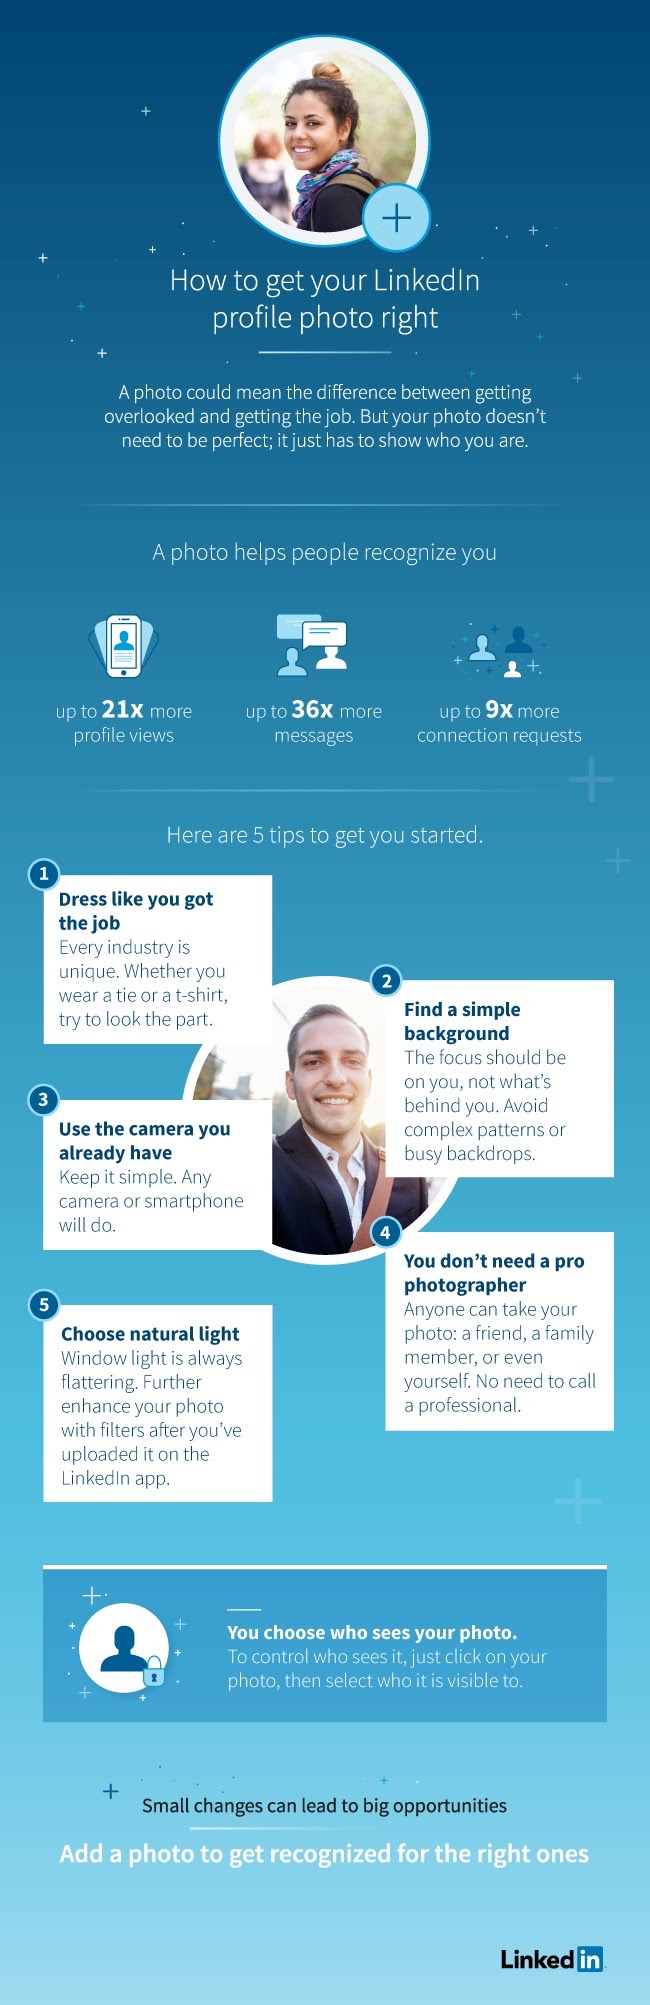 How to Get Your LinkedIn Profile Photo right - #infographic